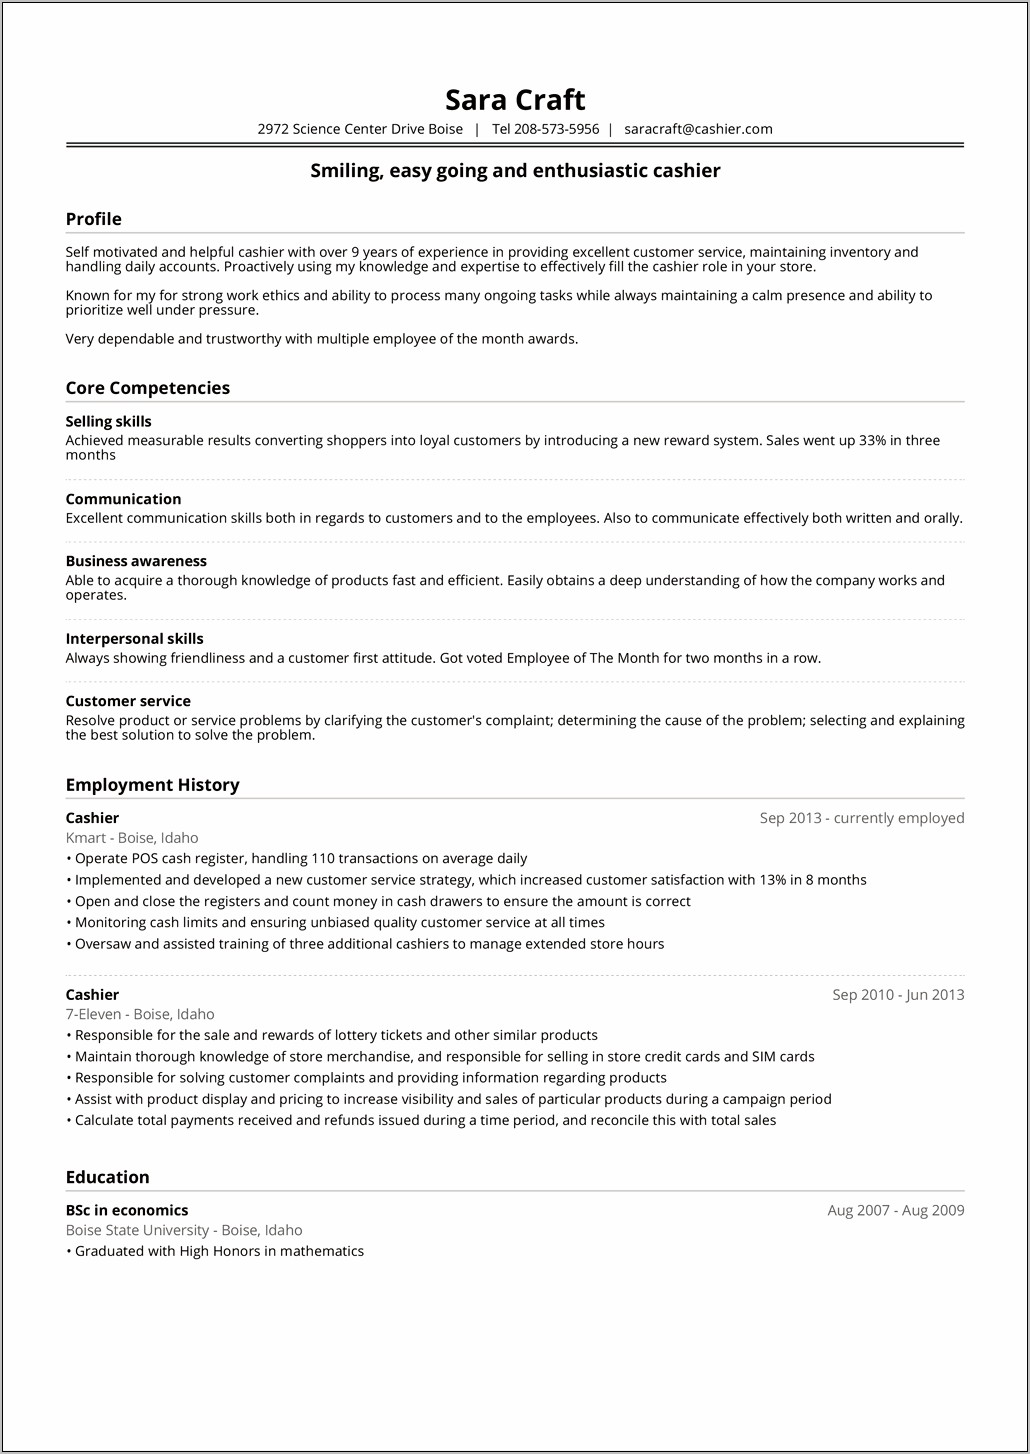 Is Friendly A Good Highlight For A Resume